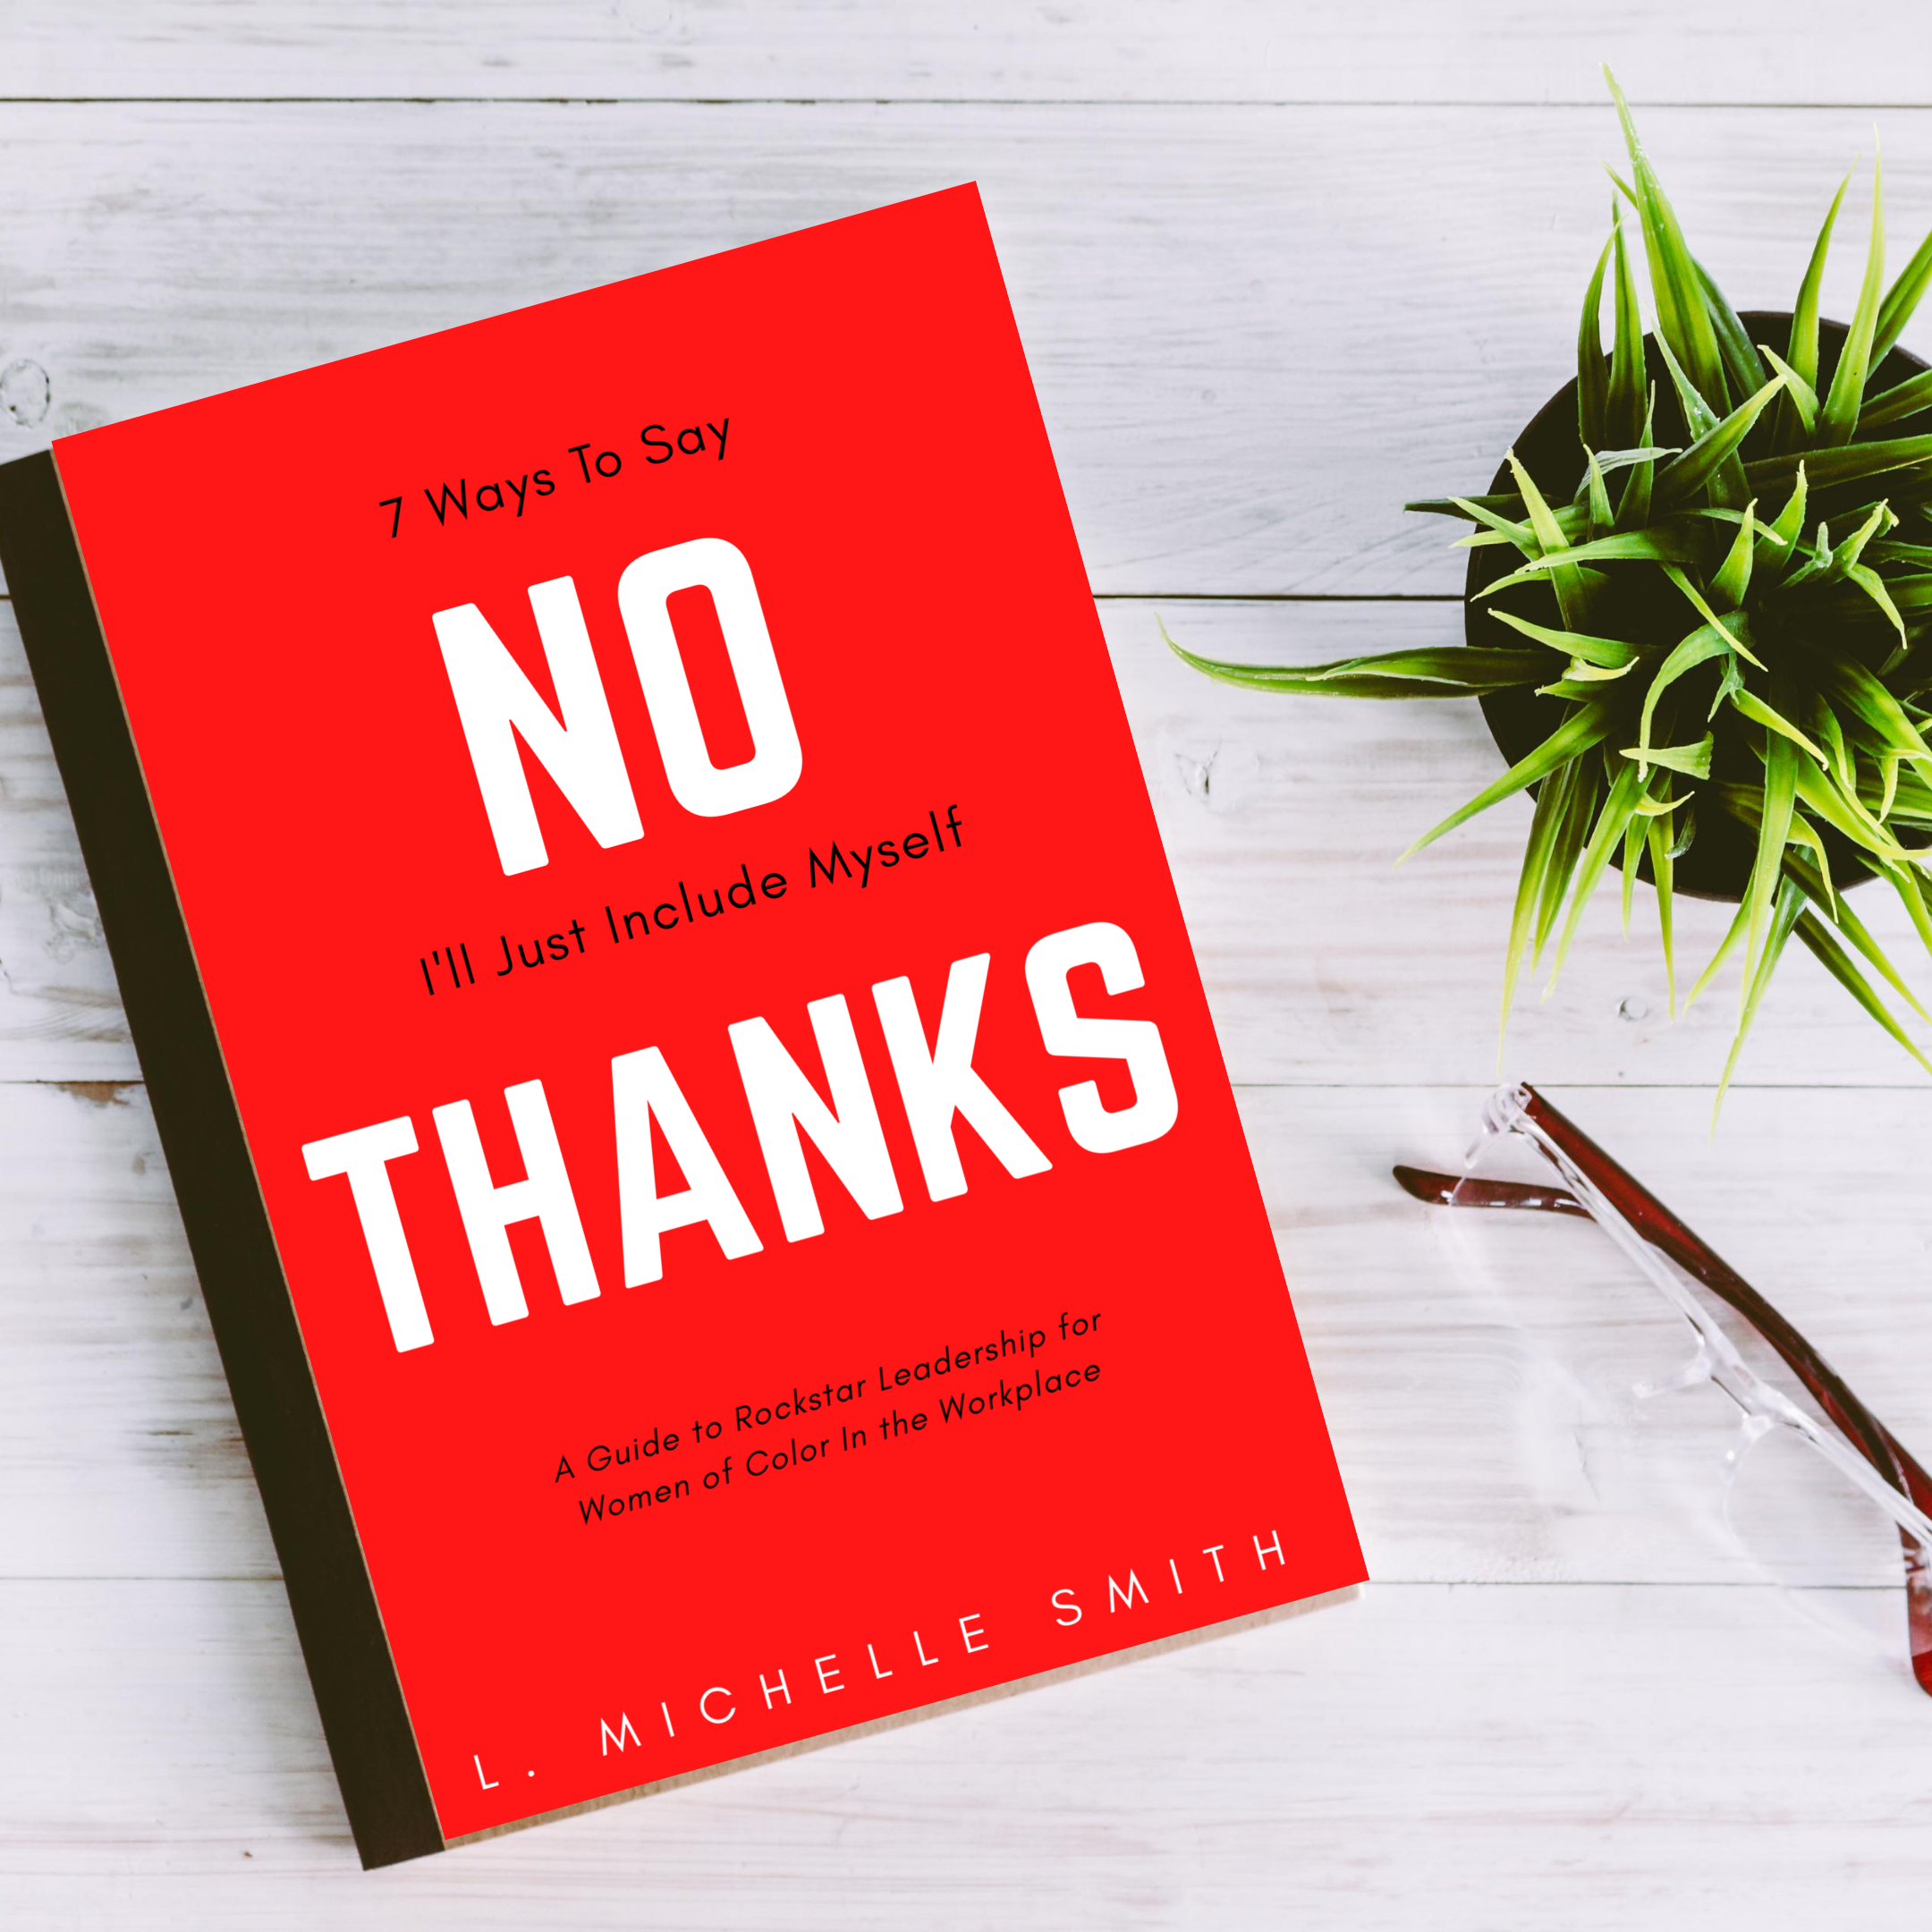 No Thanks: 7 Ways to Say I’ll Just Include Myself Shows Professional Women of Color How to Shift their Mindsets, ‘Flip Privilege’  and Bet on Themselves on the Way to the C-Suite